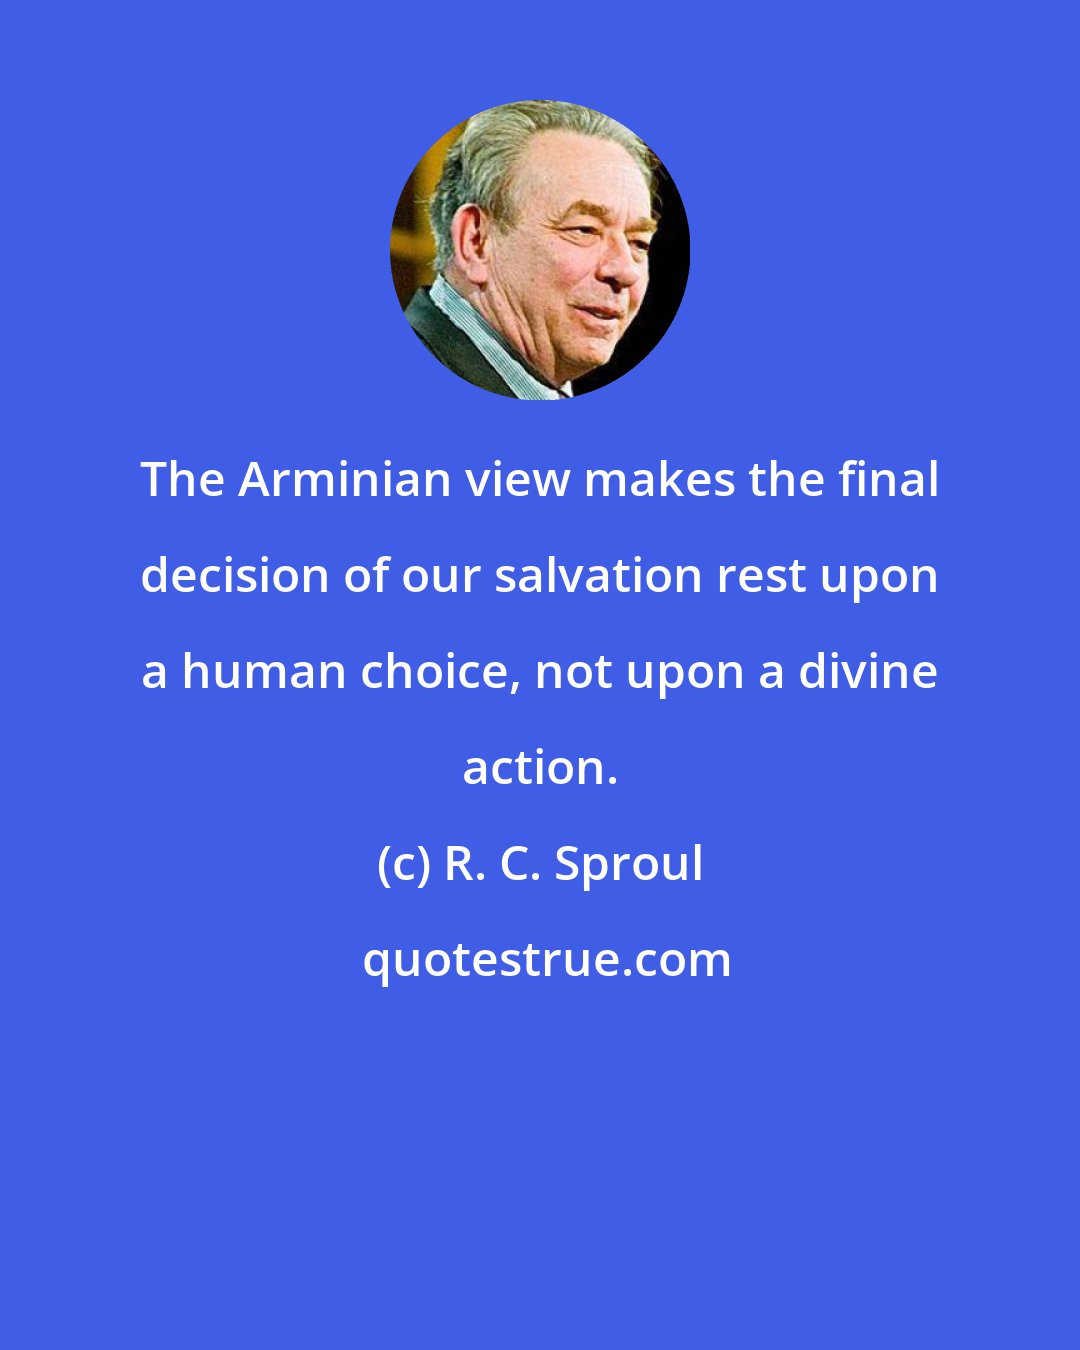 R. C. Sproul: The Arminian view makes the final decision of our salvation rest upon a human choice, not upon a divine action.